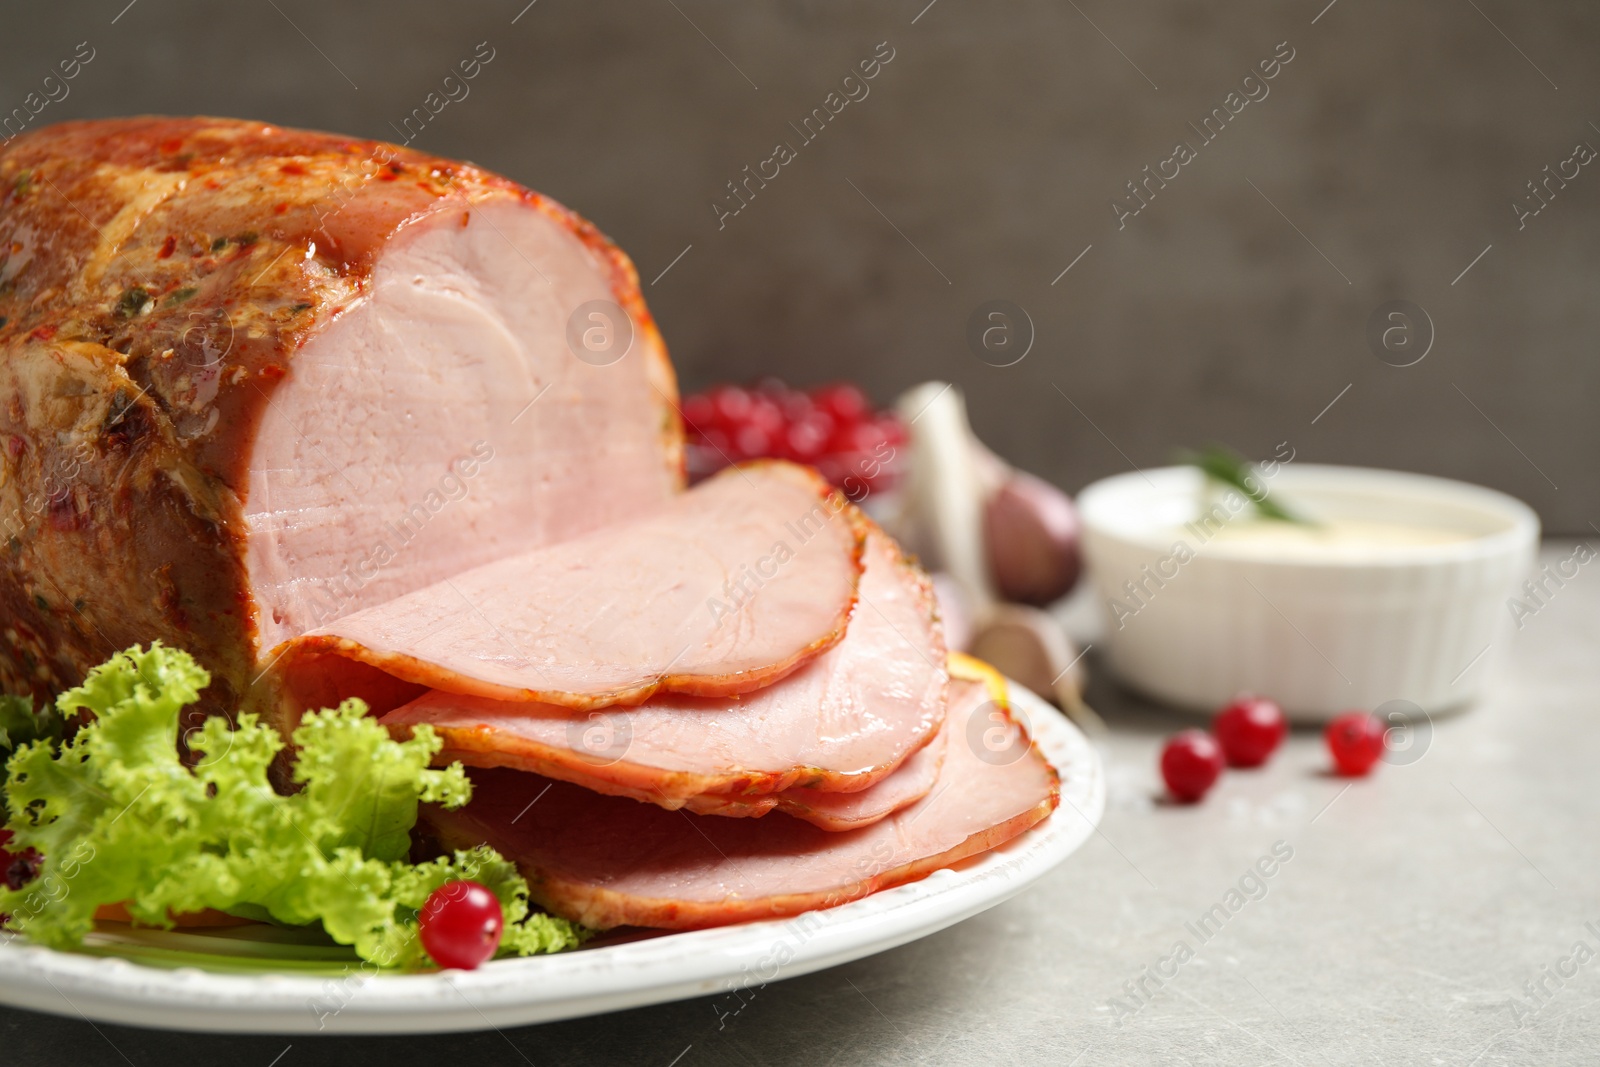 Photo of Delicious ham served with garnish on grey table, closeup